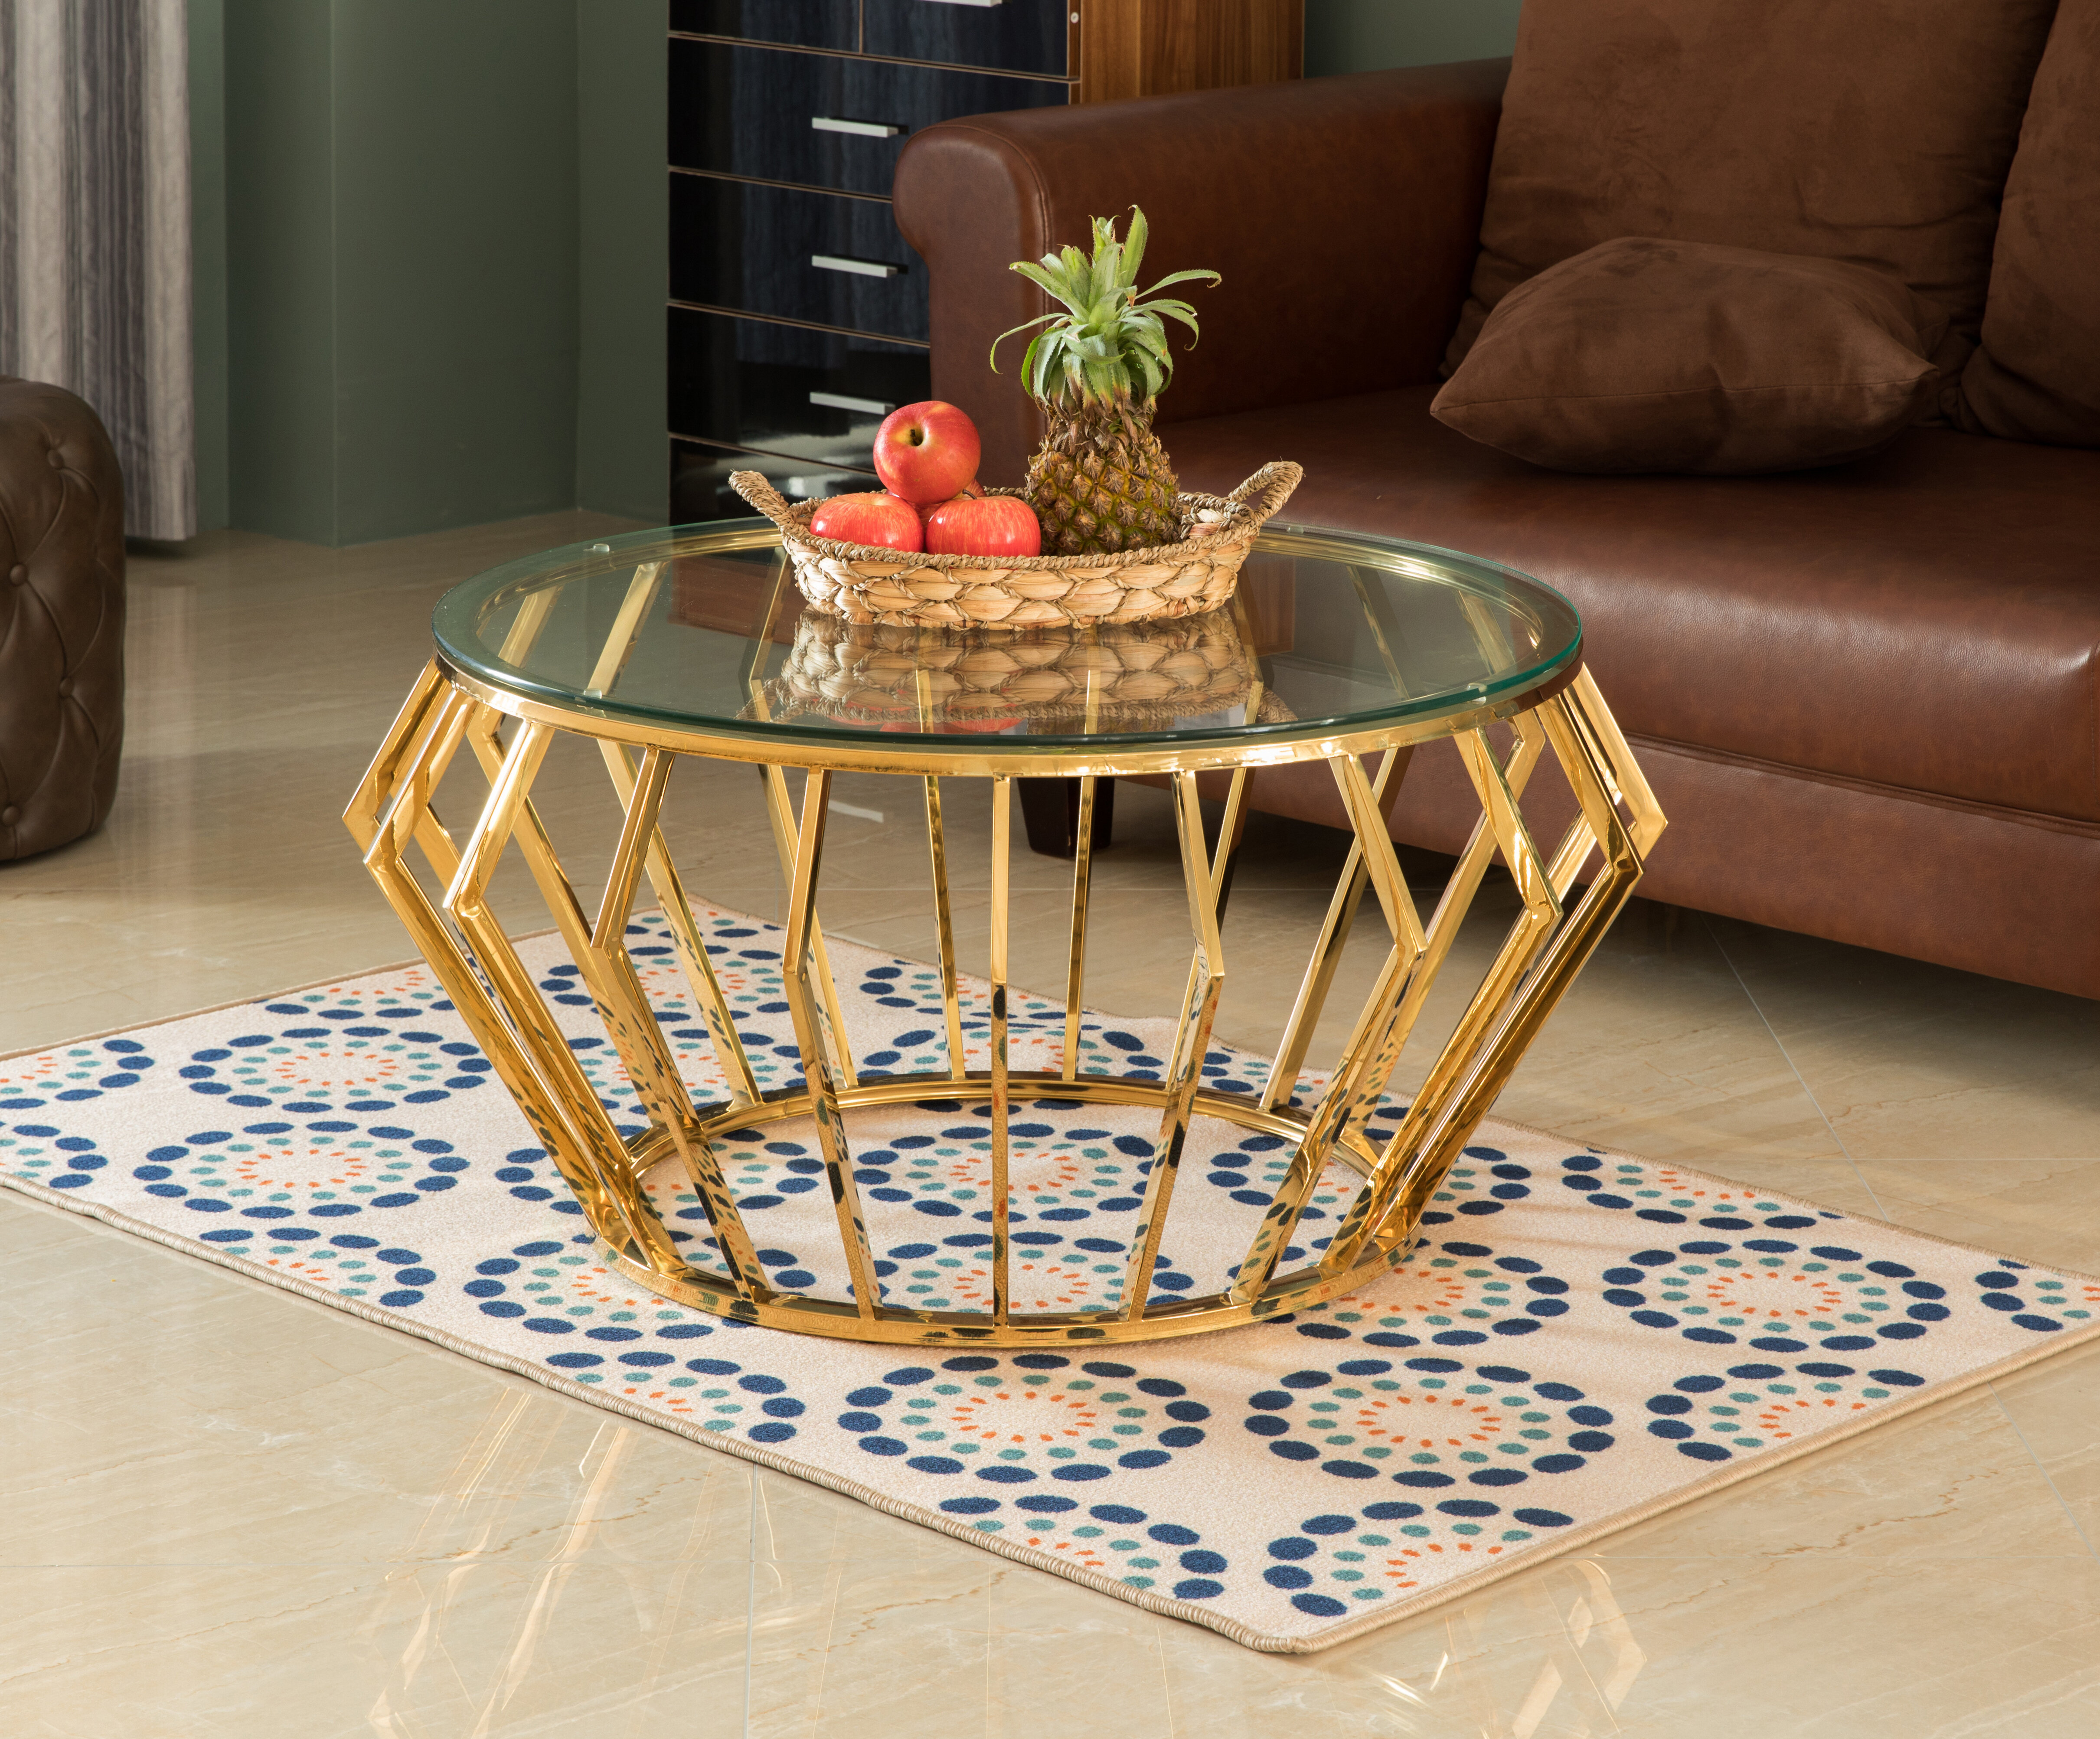 Liberty Furniture Kingston Plantation Round Cocktail Table With Beveled Glass Top And Metal Stretcher Royal Furniture Cocktail Coffee Tables